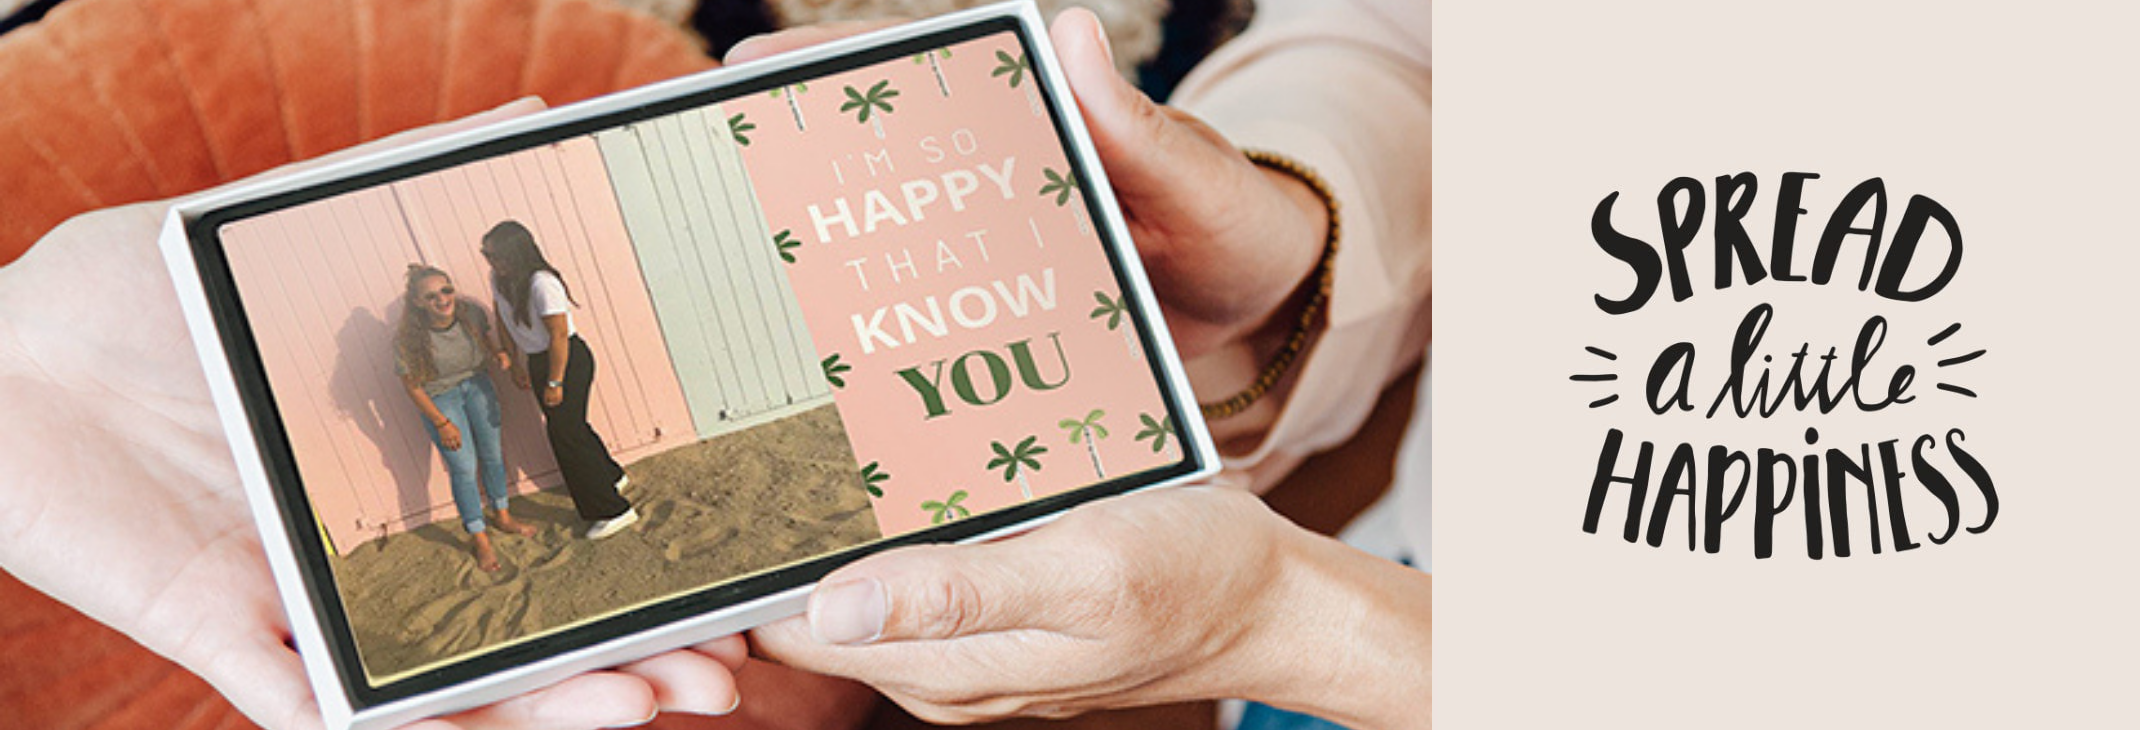 personalised gifts as a compliment